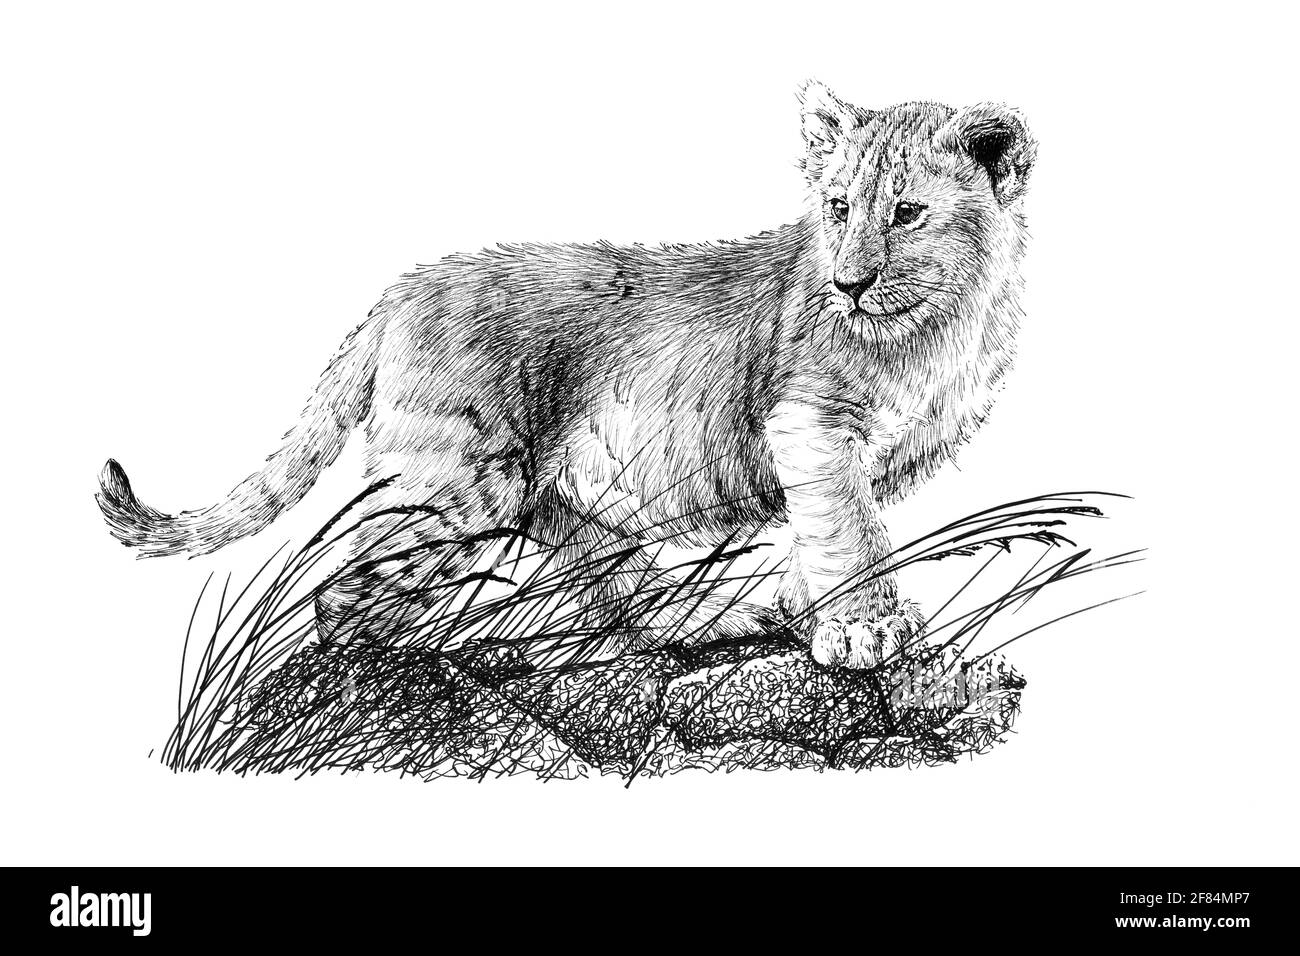 Lion standing with small cub continuous one Vector Image